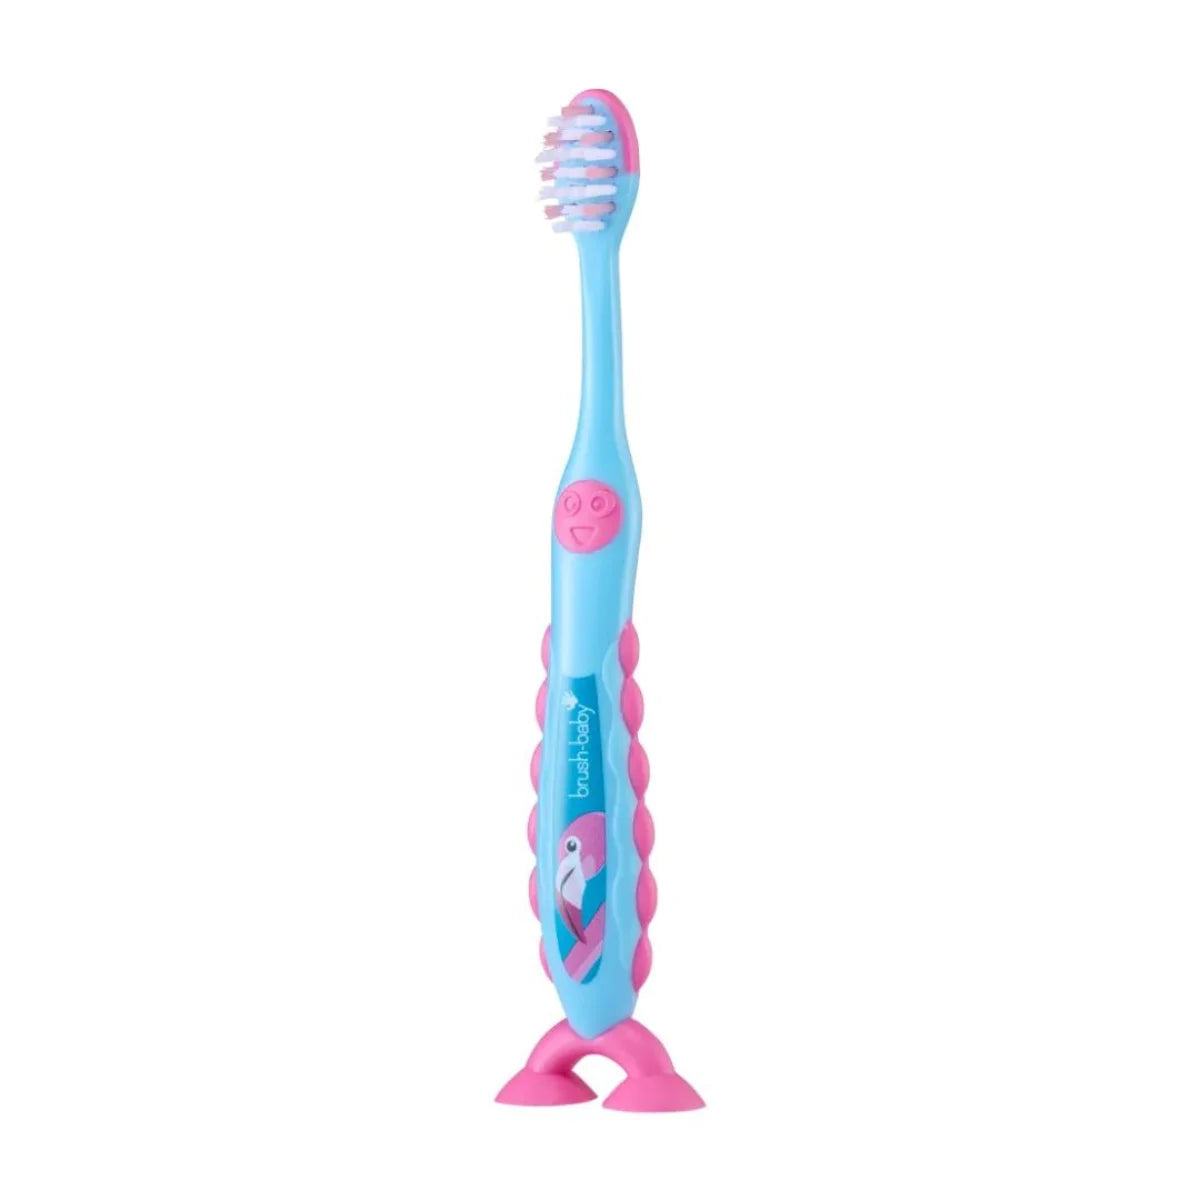 Blue Jett the Rocket Deep clean Bristles kids toothbrush Flossbrush with red sucker feet for 3-6 year olds